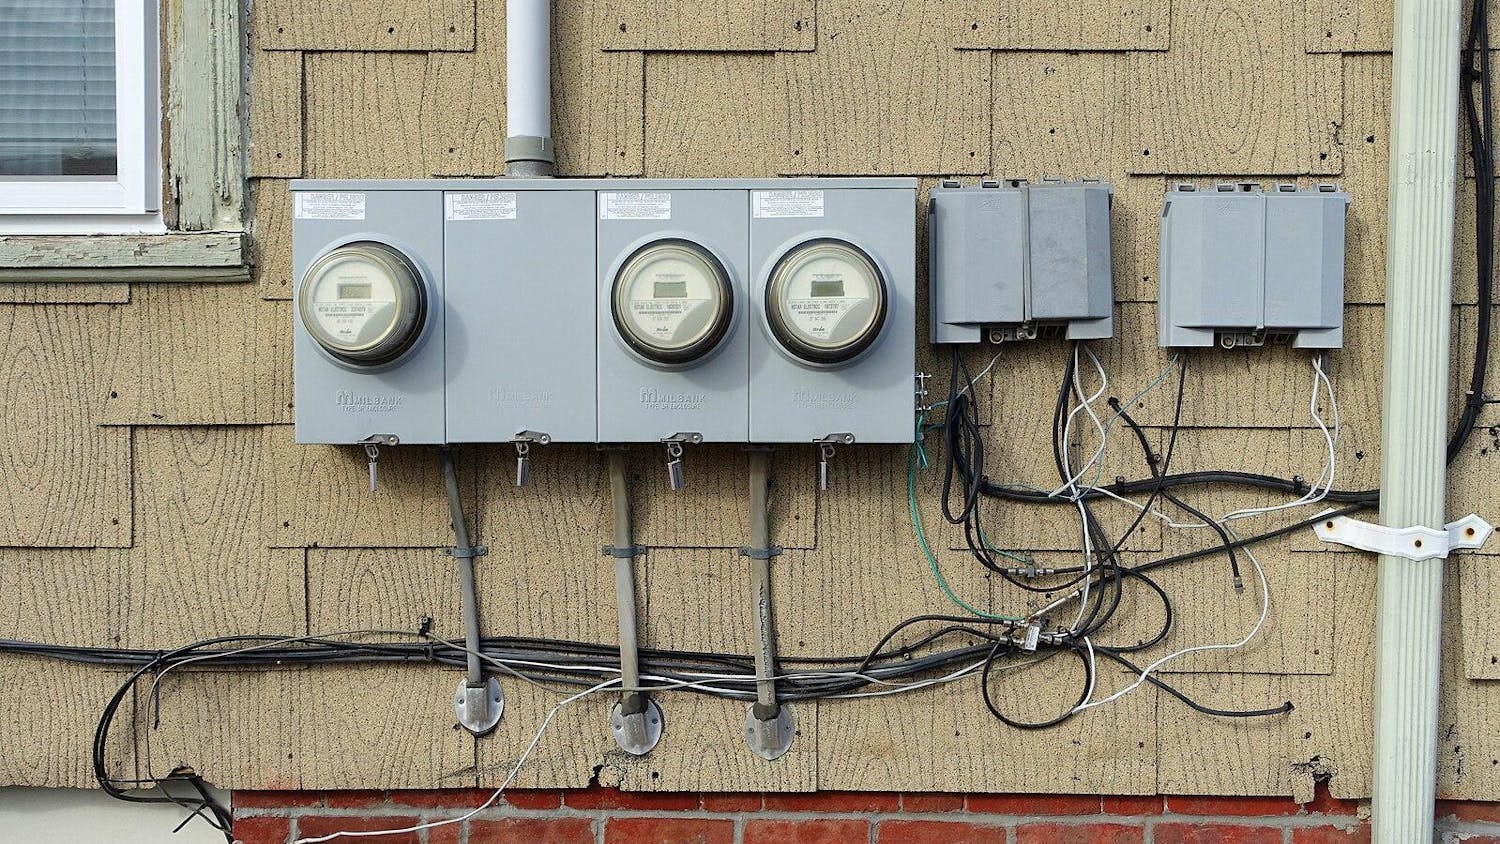 Household utilities are pictured in Arlington, Mass.